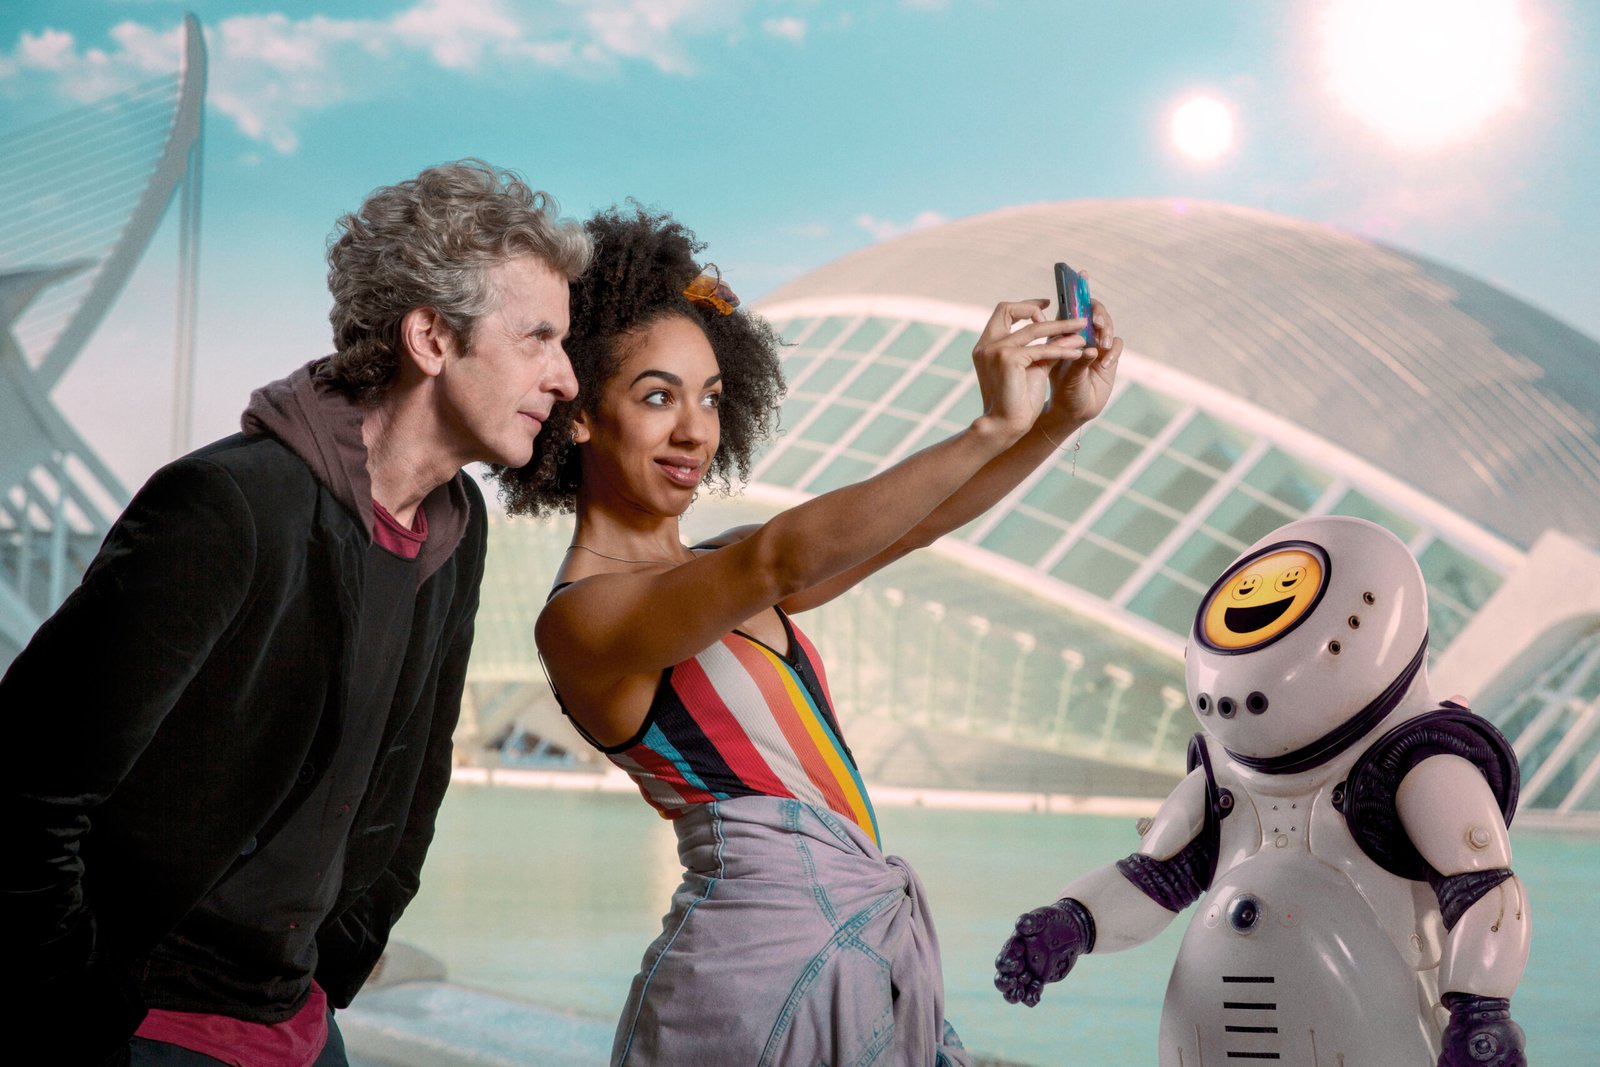 Pearl Mackie on Returning to Doctor Who: “It’s Such a Wonderful Thing, so I Wouldn’t Say No”